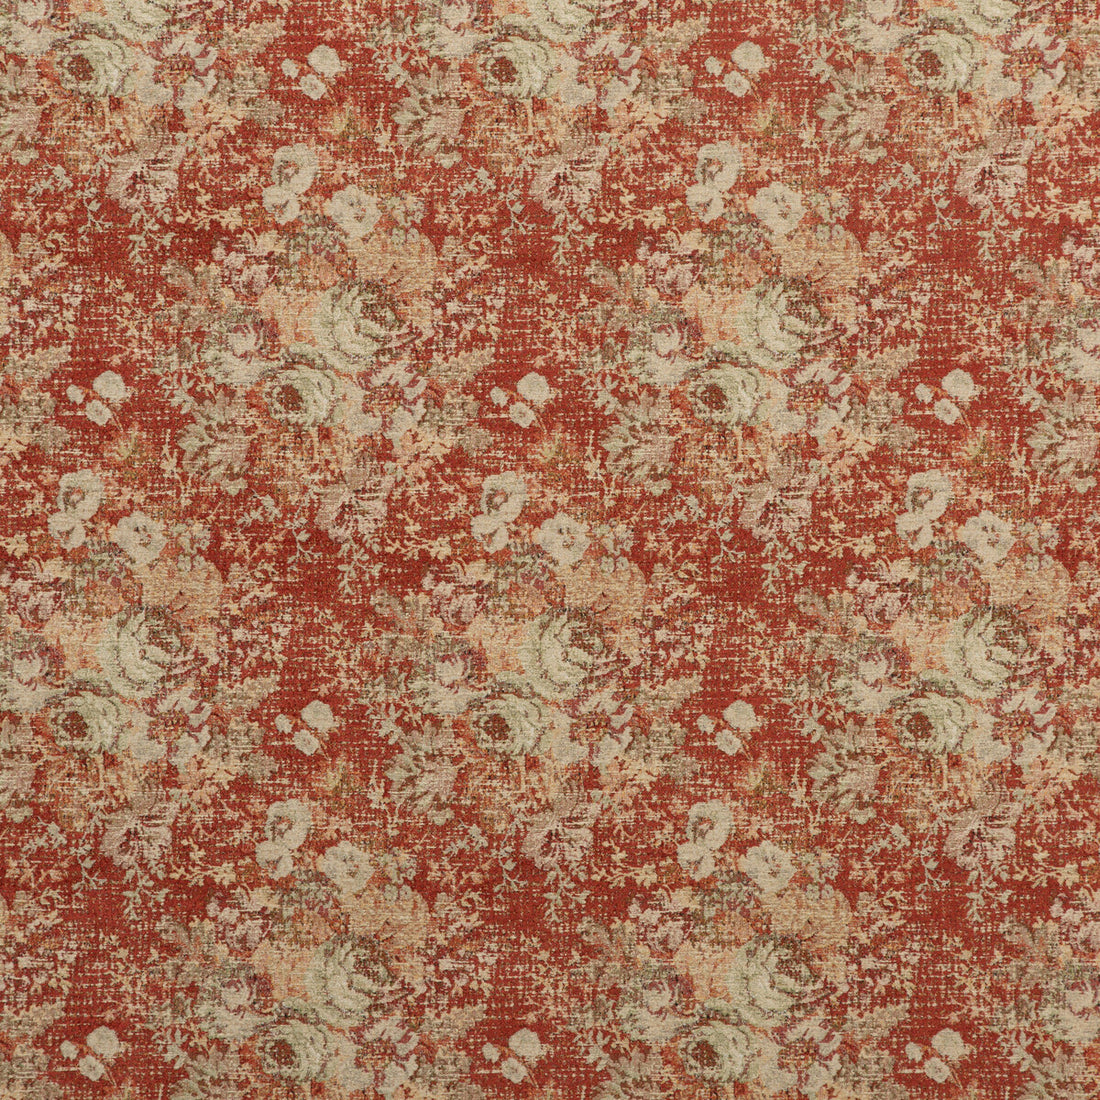 Bohemian Tapestry fabric in sienna color - pattern FD725.M30.0 - by Mulberry in the Bohemian Weaves collection